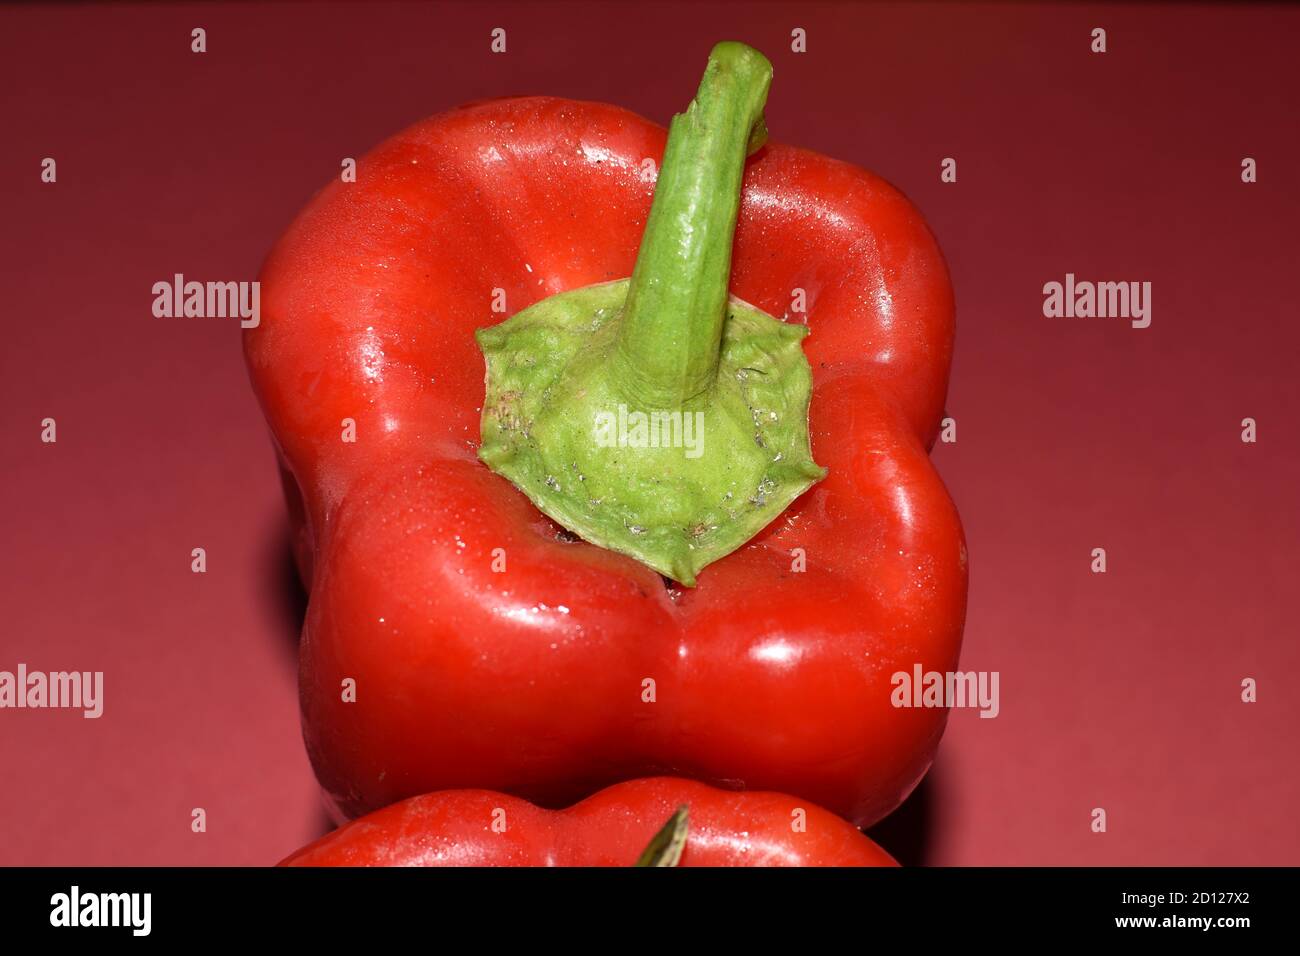 red sweet bell pepper isolated close up on red background, produce, food photography Stock Photo